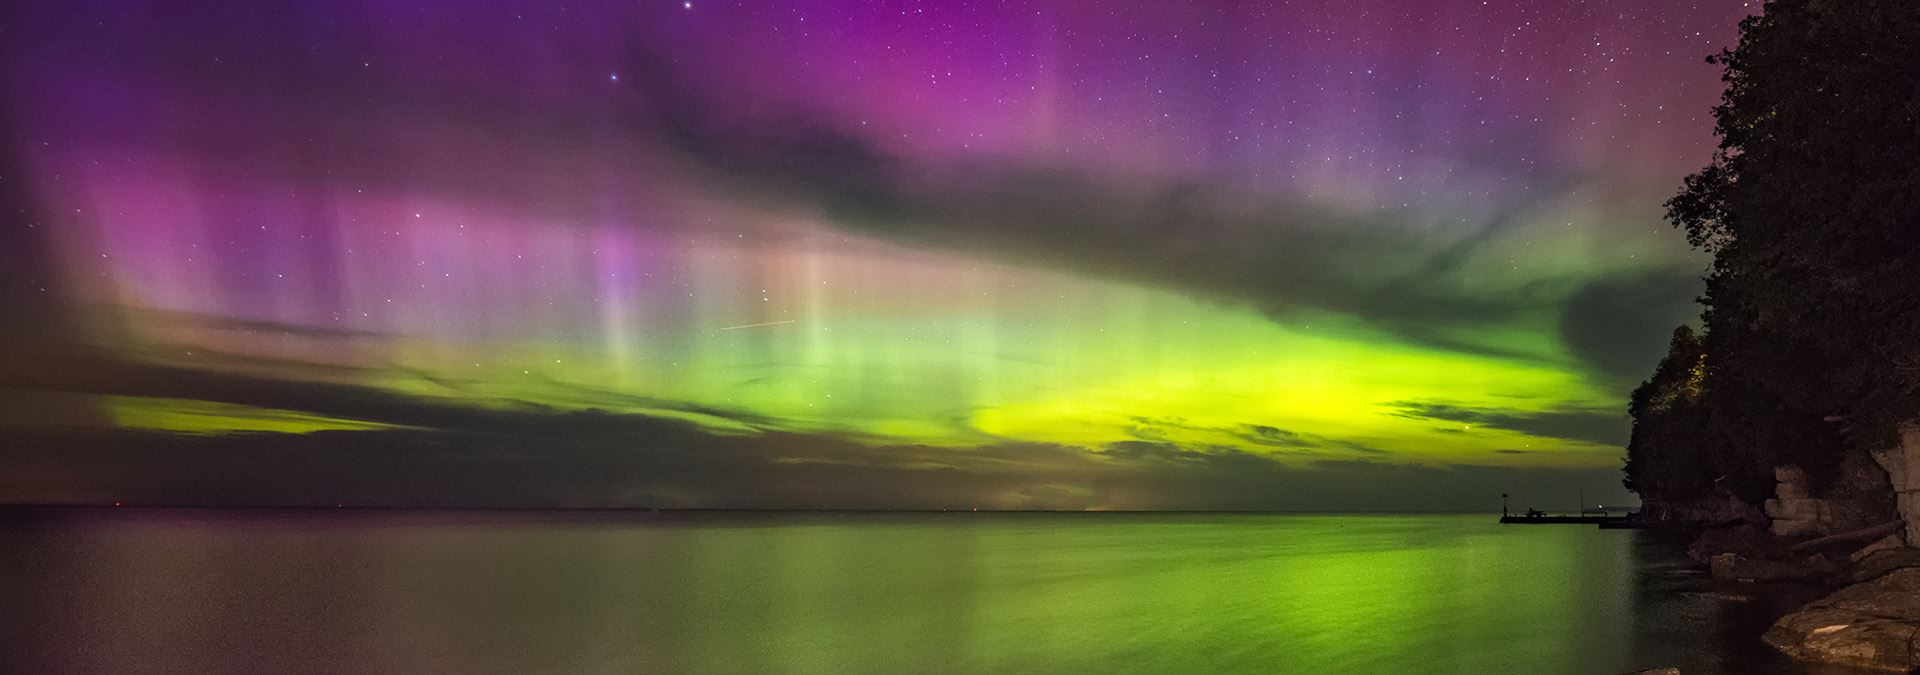 The Northern Lights over the lake.